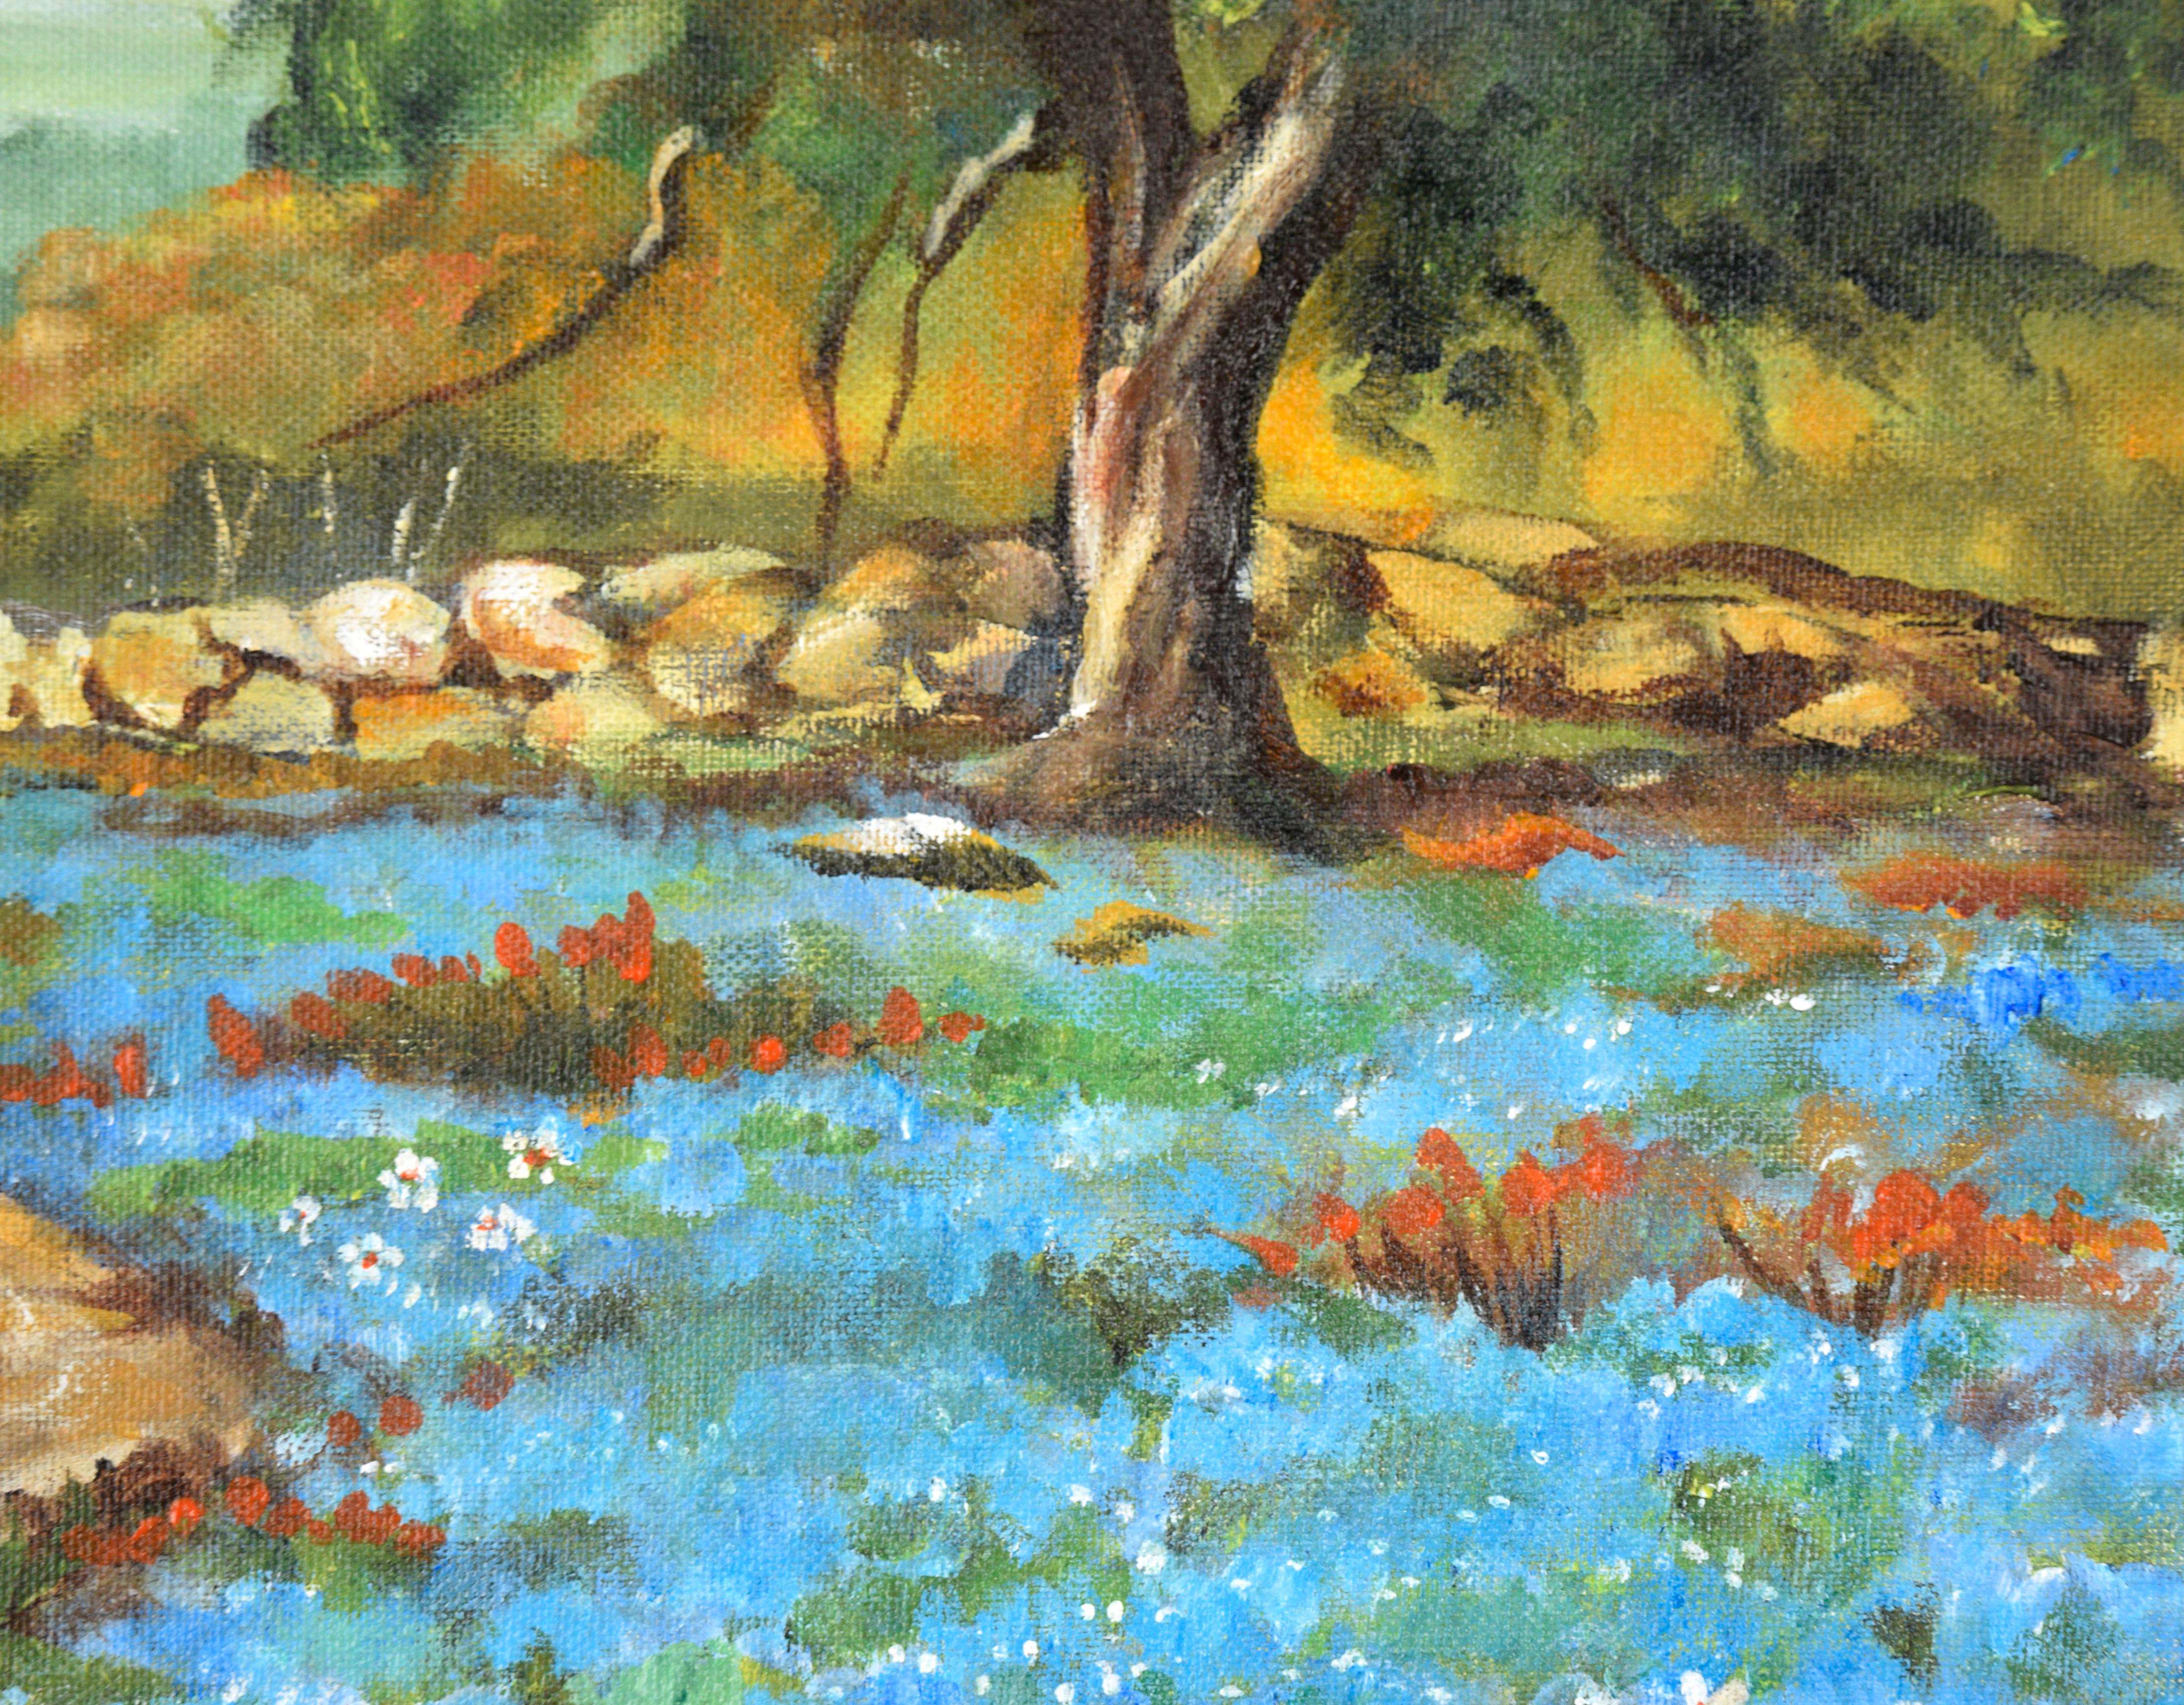 Wildflowers Blooming Under the Oak - Landscape - Brown Landscape Painting by Grace Sidwell